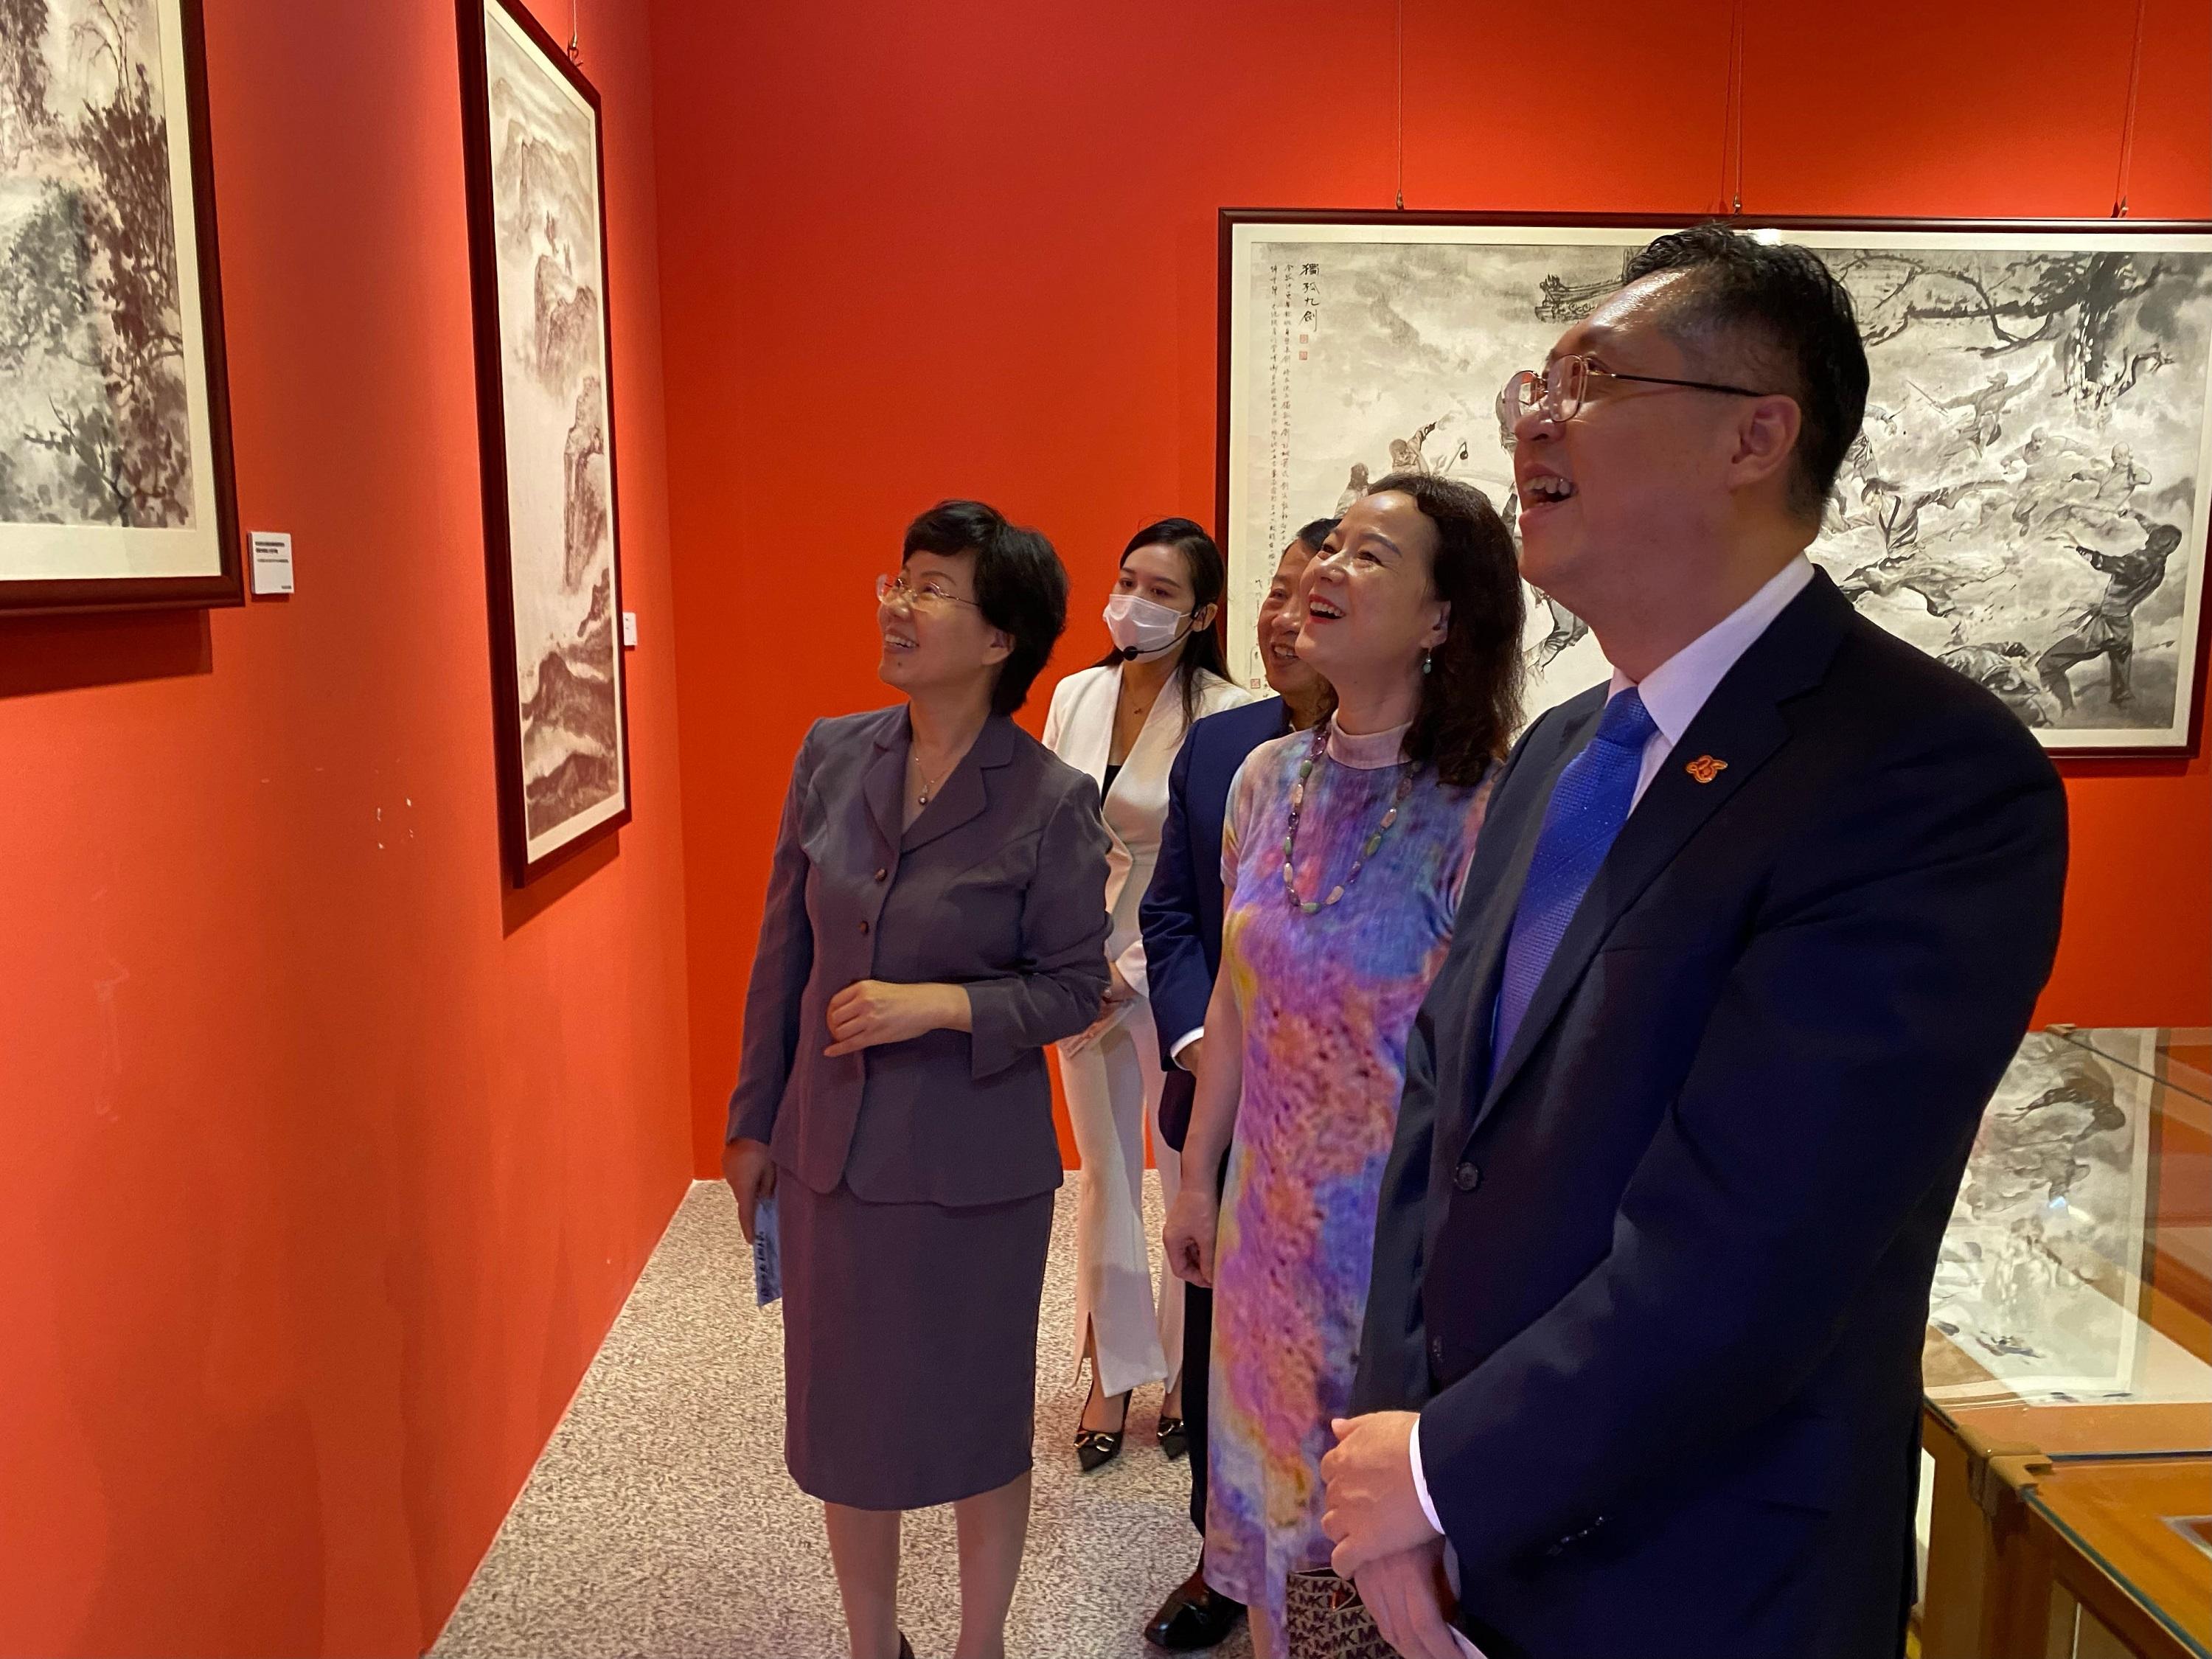 A themed exhibition on the veteran journalist and renowned writer, Dr Louis Cha (pen name Jin Yong), was officially opened today (September 9) at the Hubei Provincial Library in Wuhan. Photo shows the Director of the Hong Kong Economic and Trade Office in Wuhan, Mr Franco Kwok (first right); the Director General of the Hong Kong and Macao Affairs Office of Hubei Province, Ms Zhang Xiao-mei (second right); and the Director General of the Department of Culture and Tourism of Hubei Province, Ms Li Shu-yong (first left), touring the exhibition.